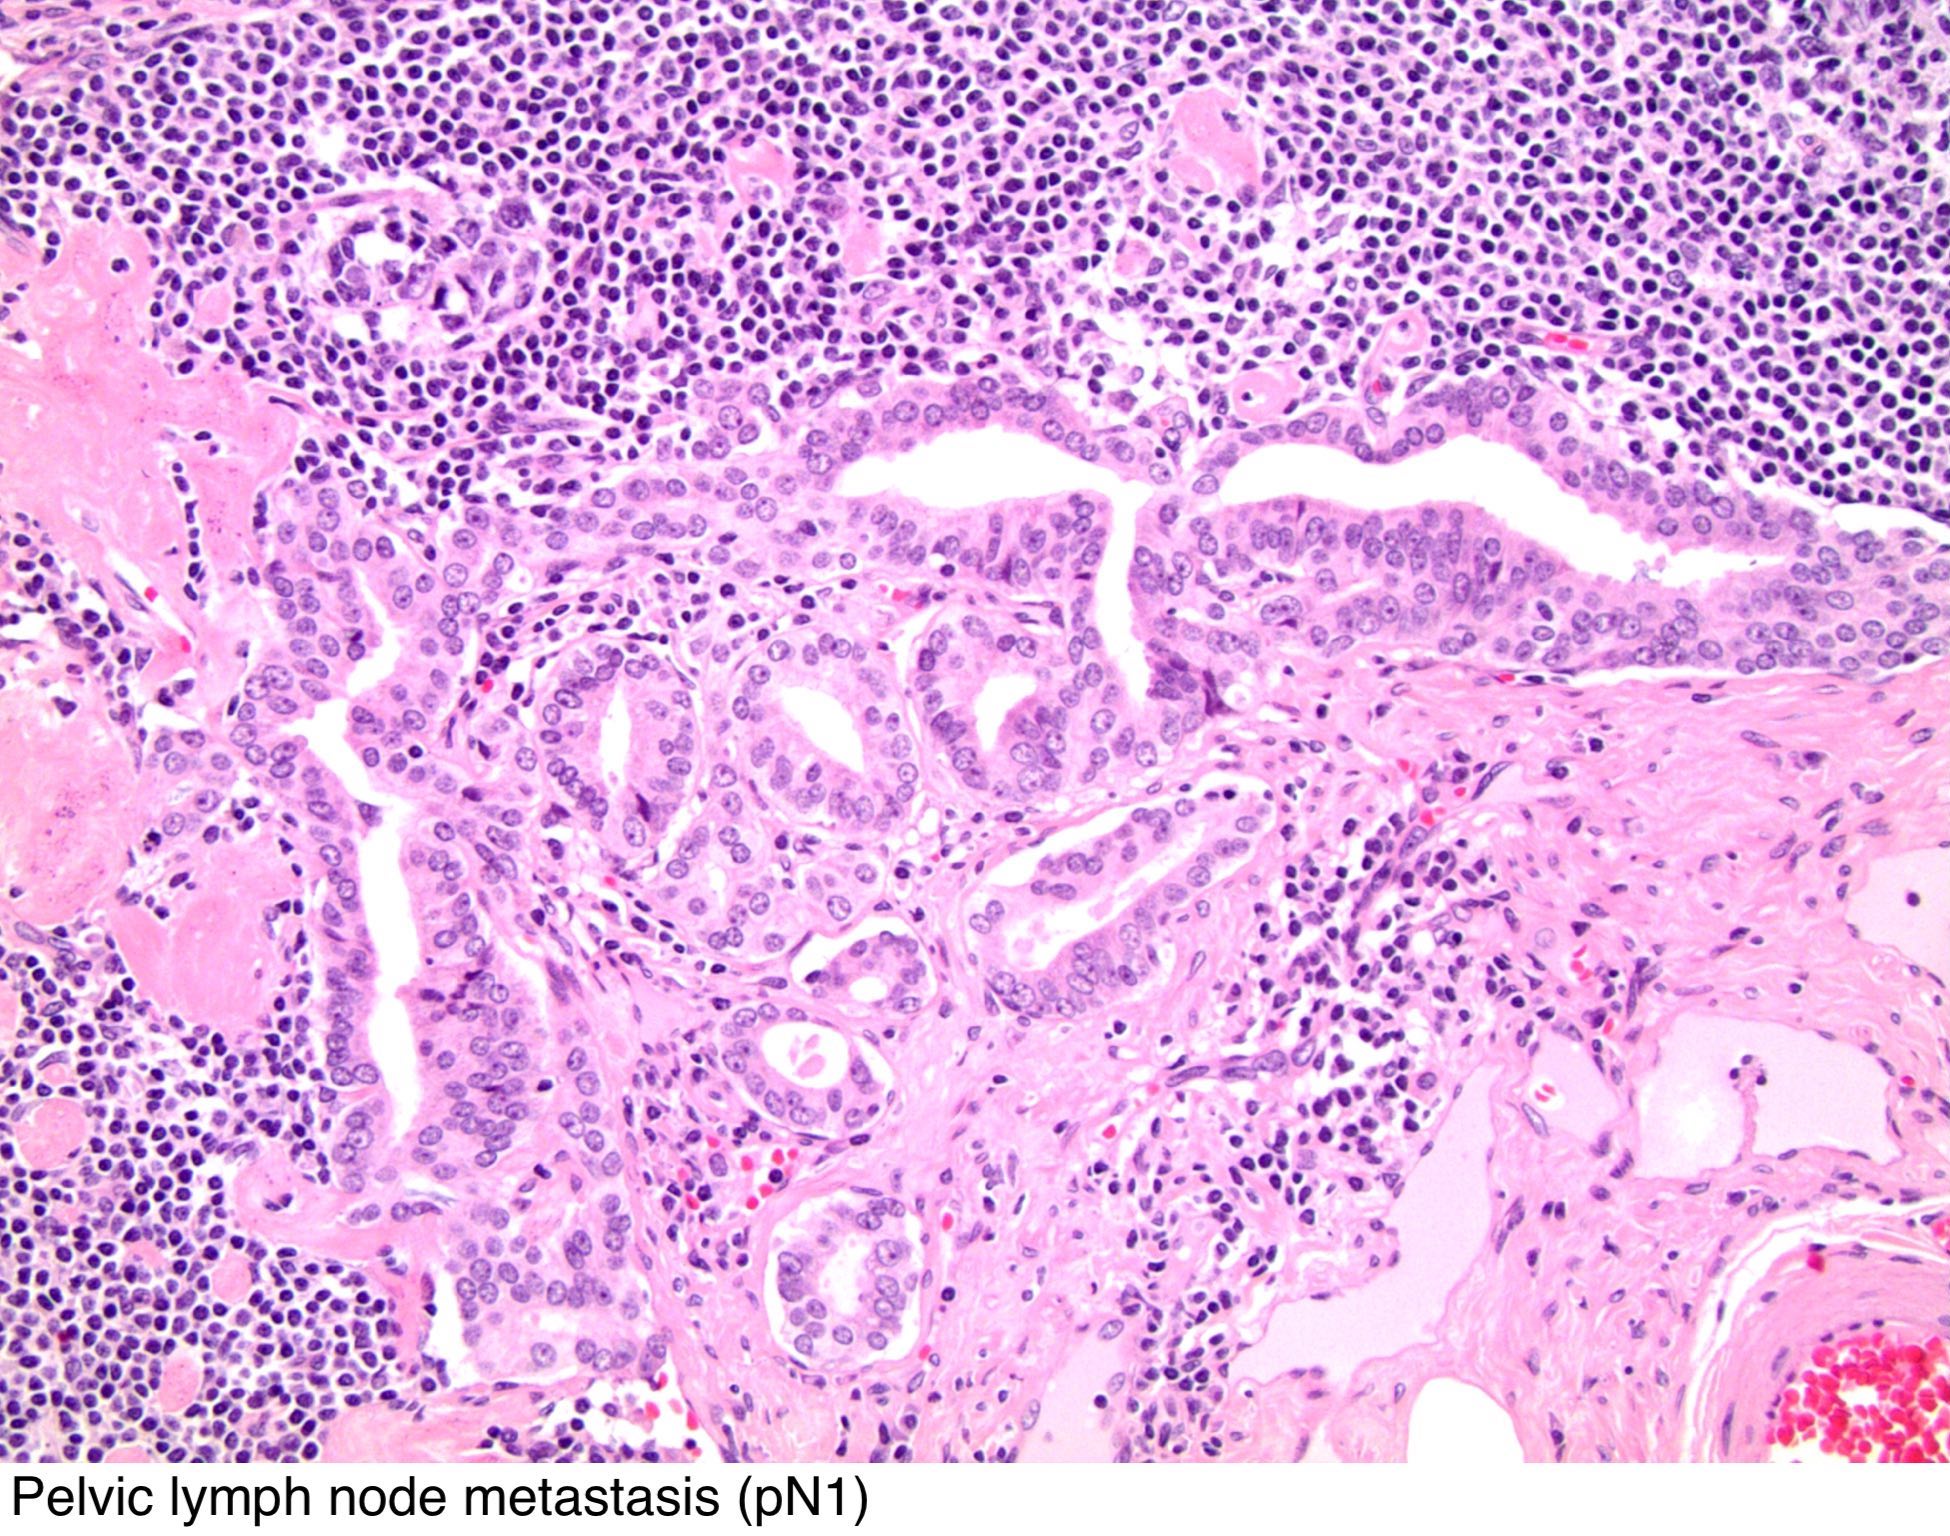 Urothelial cell papilloma, Inverted papilloma bladder pathology. Inverted urothelial papilloma